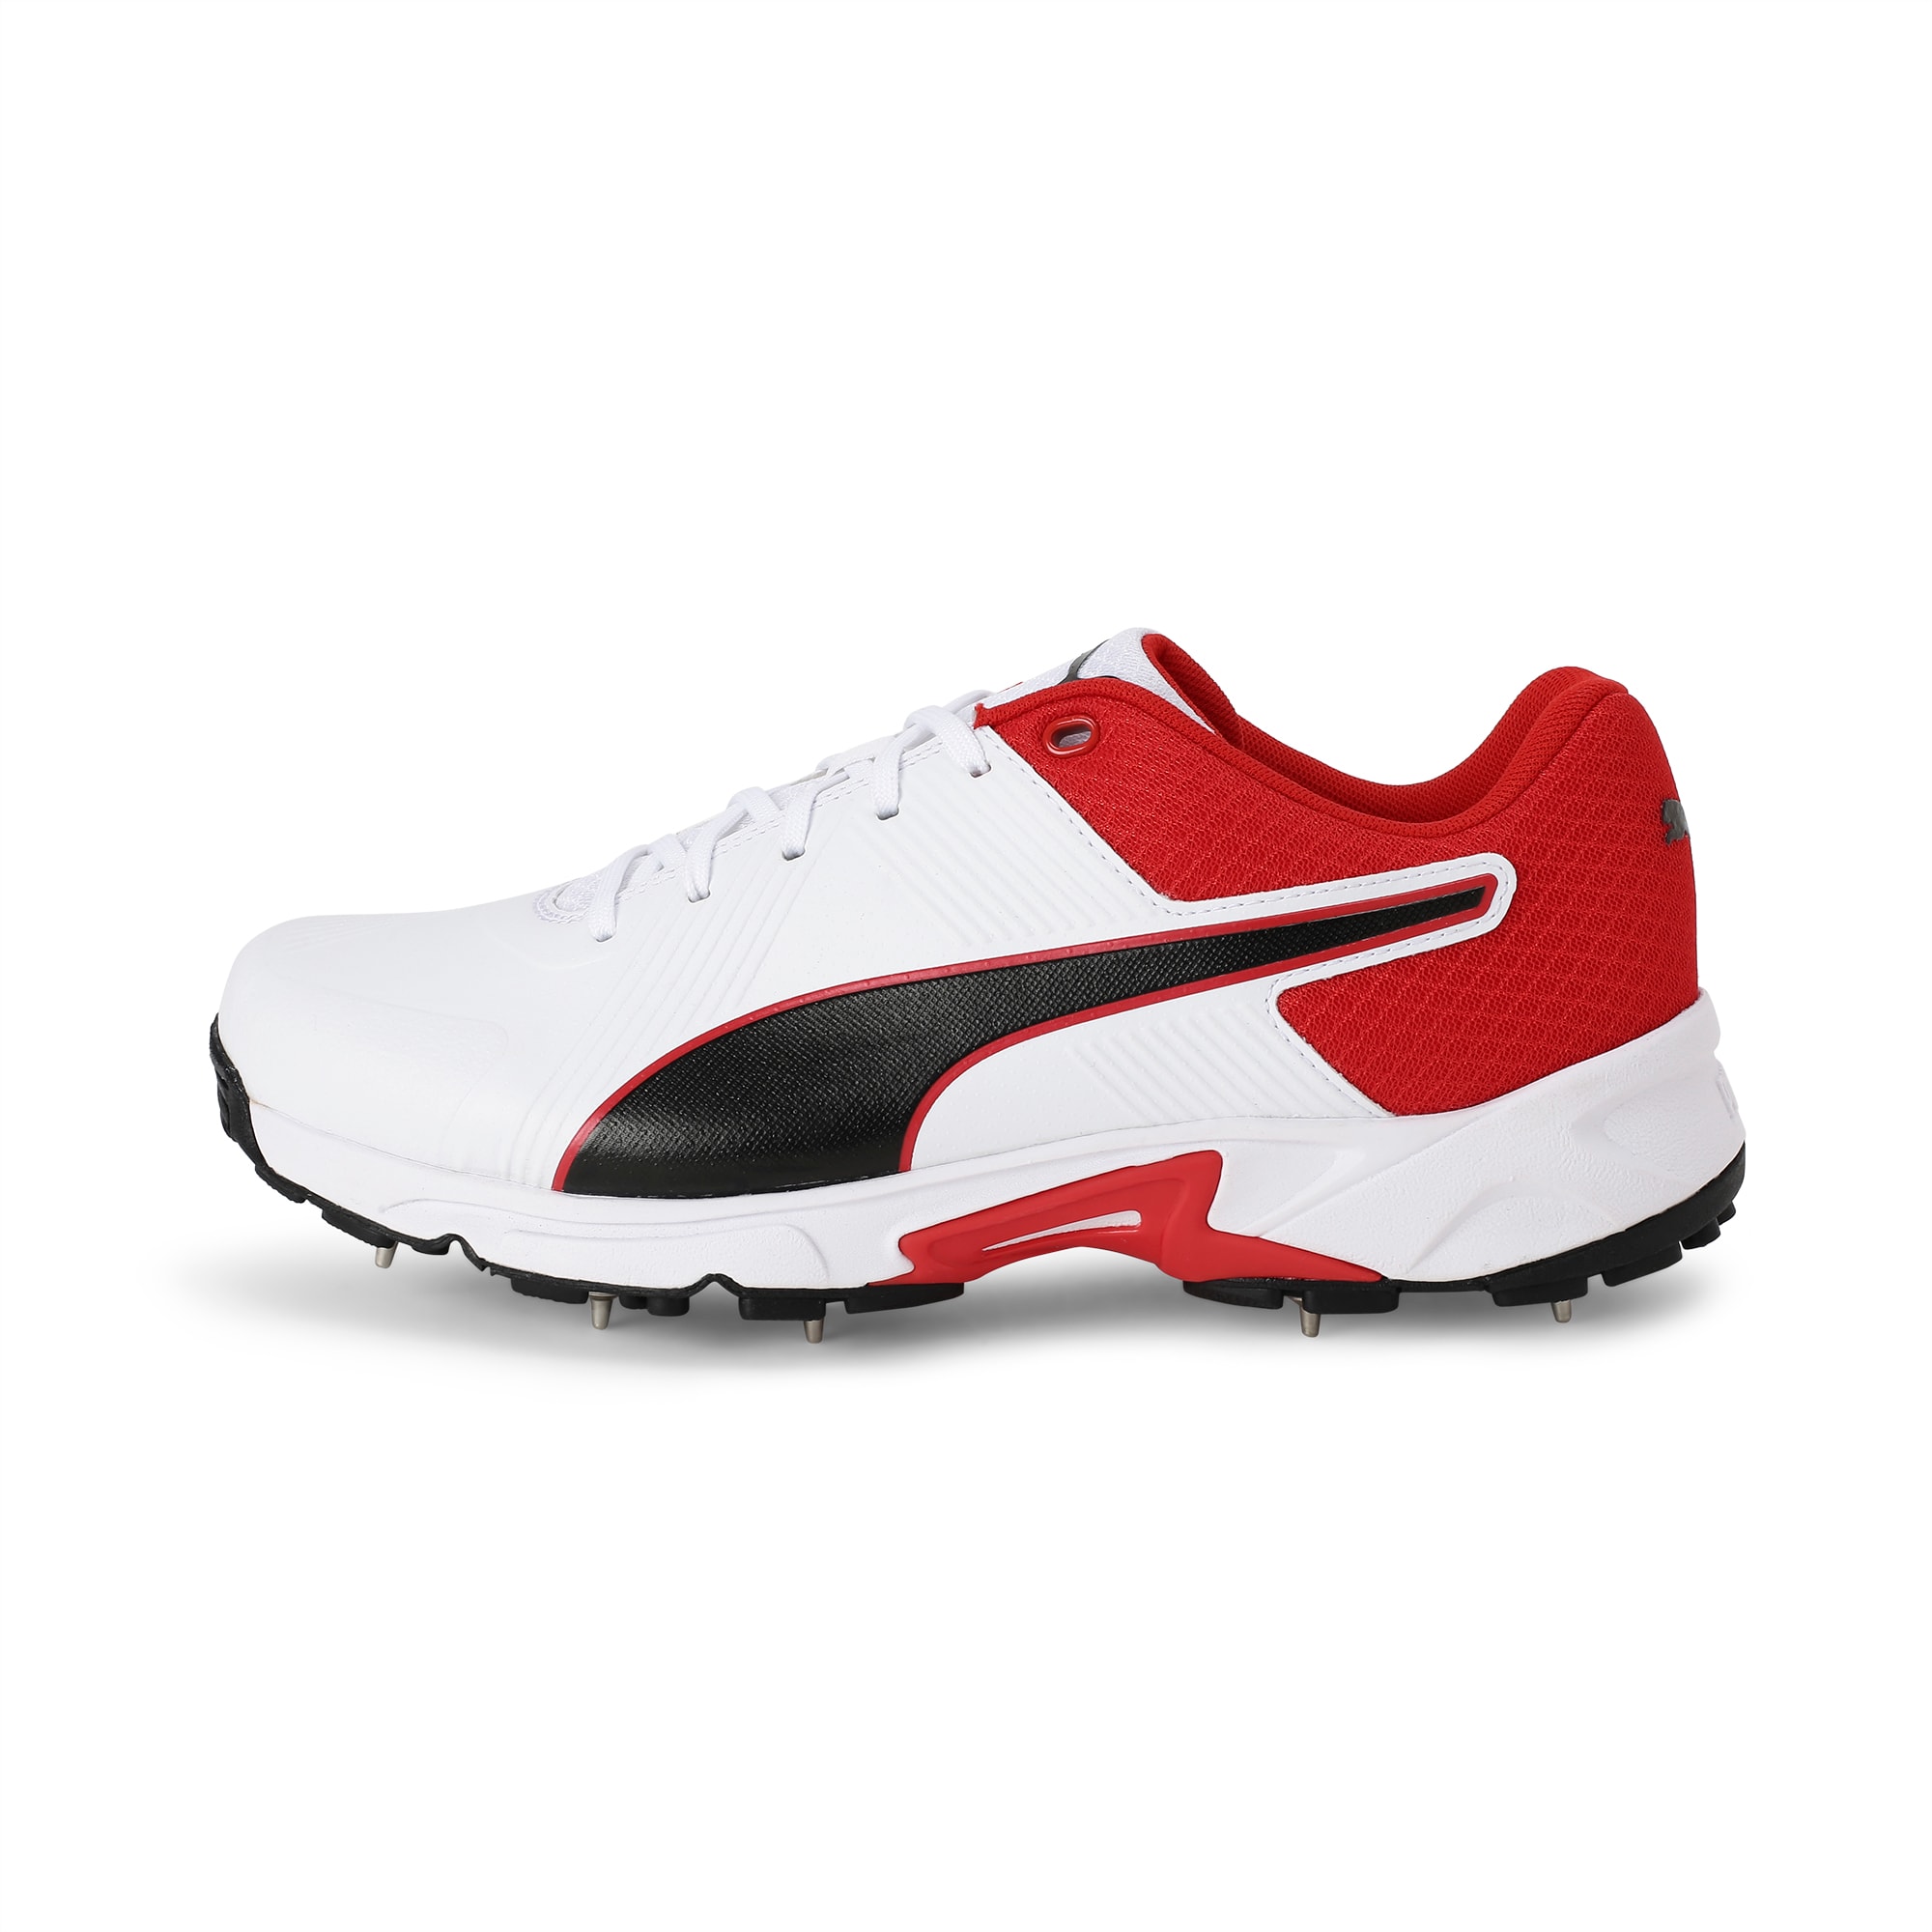 puma spikes shoes for running